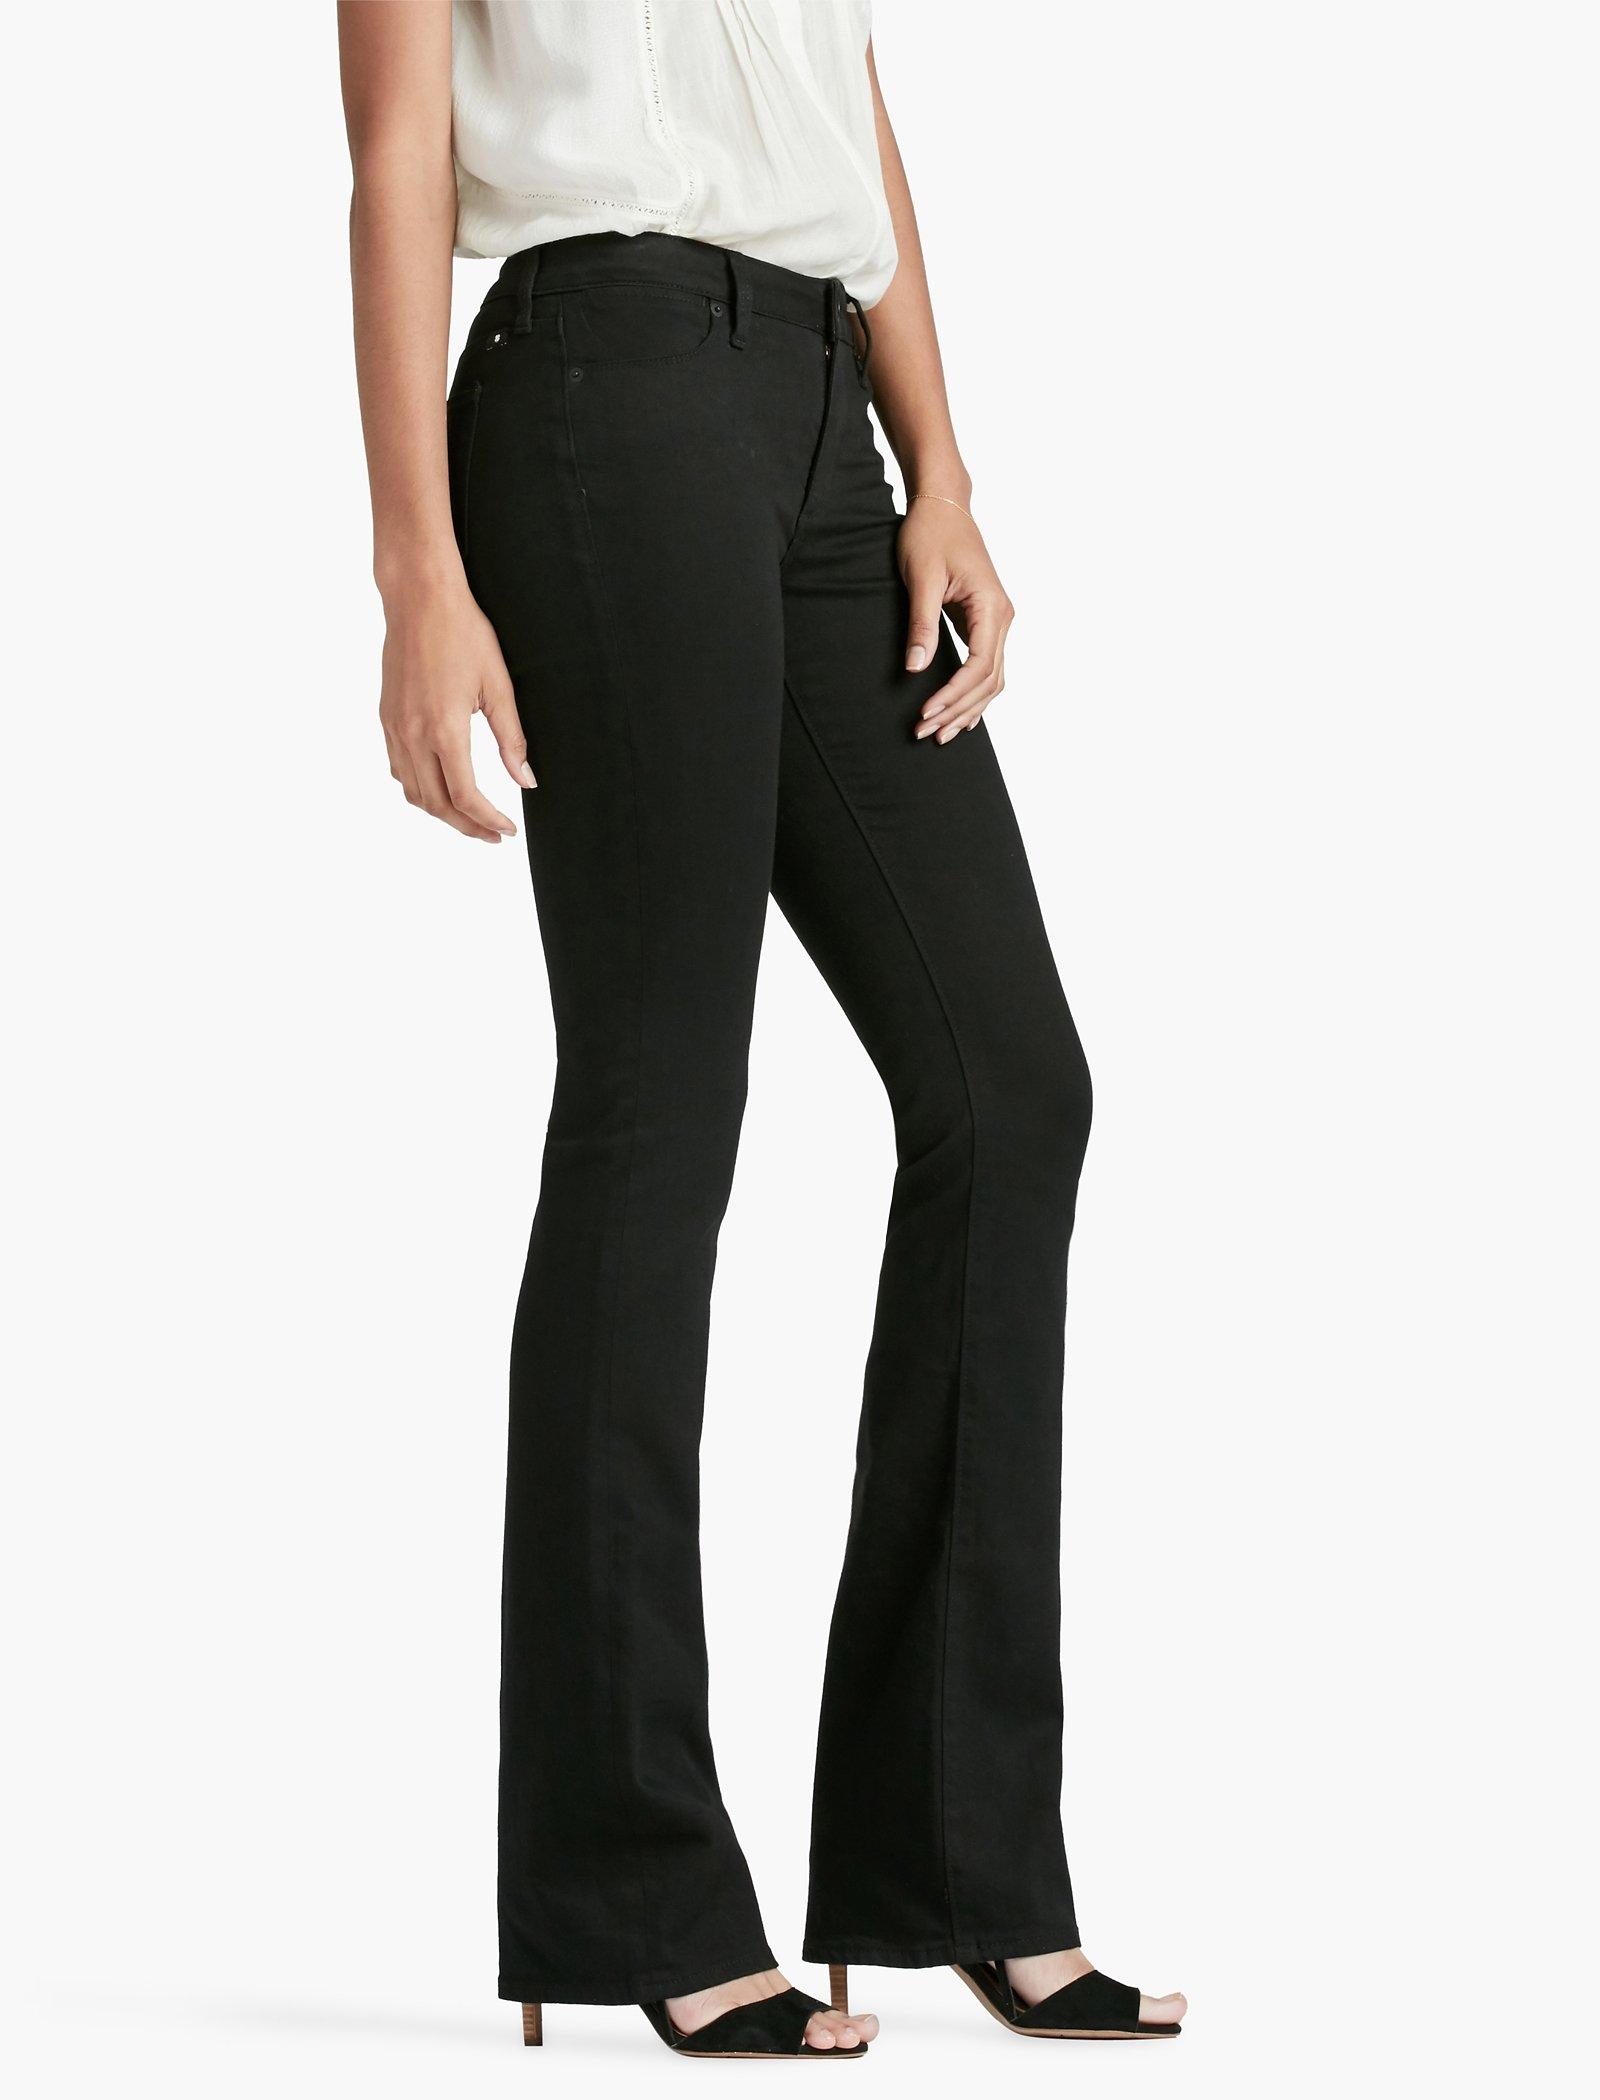 HAYDEN HIGH RISE SCULPTING BOOTCUT JEAN IN BLACK AMBER | Lucky Brand